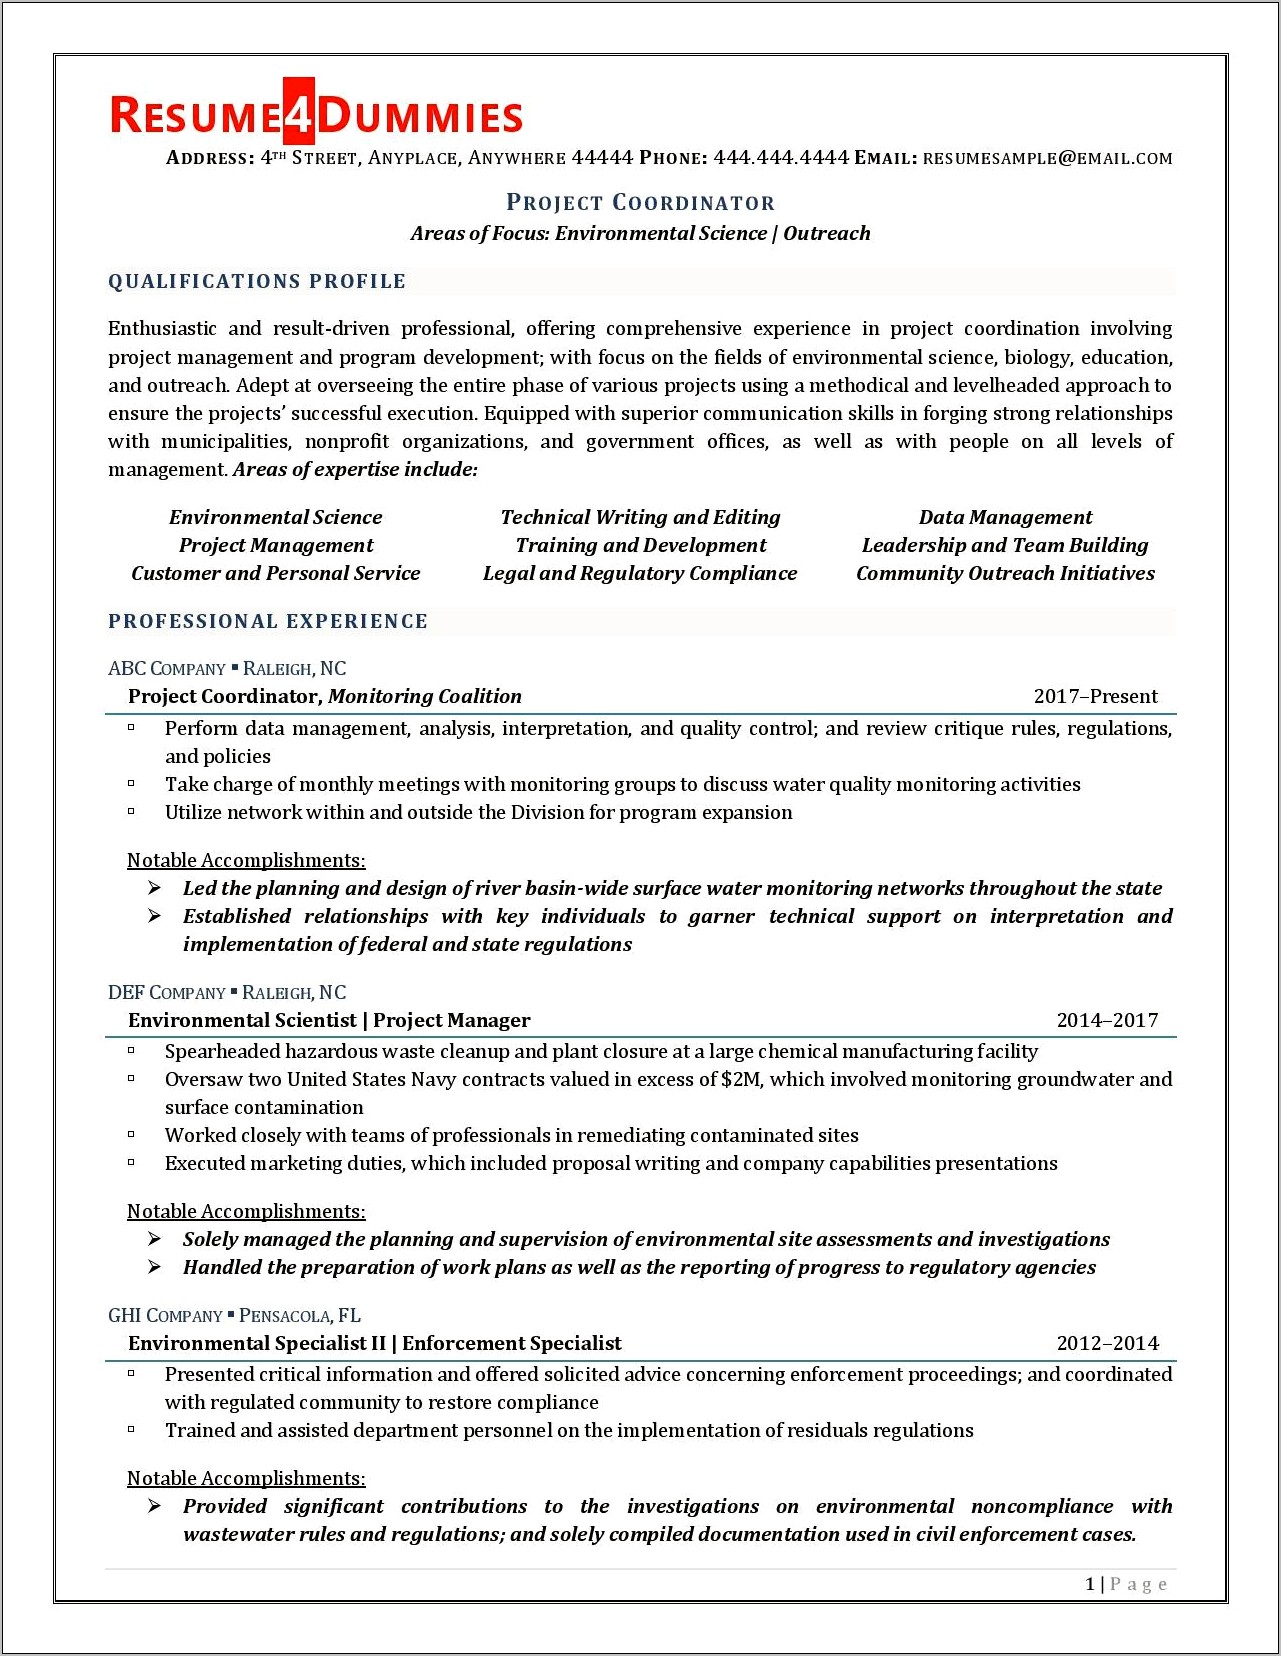 Career Objective For Resume For Project Coordinator